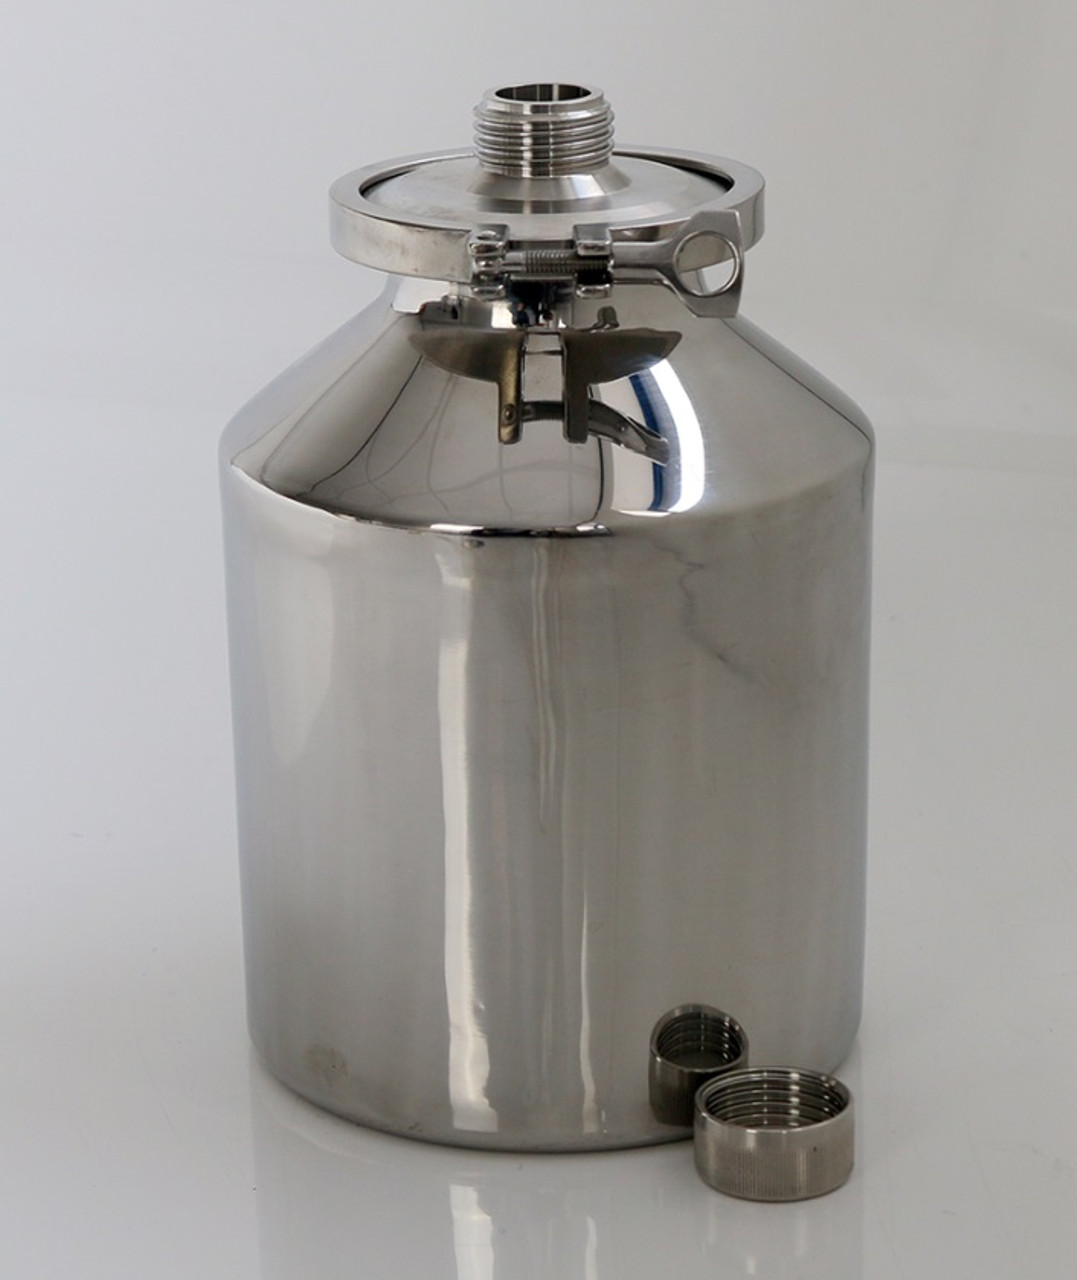 Stainless Container 10L with External GL45 Thread
• Multi purpose containers
• Heavy duty construction
• Crevice free interior
• 316L stainless steel construction
• Lid can be completely removed for full cleaning